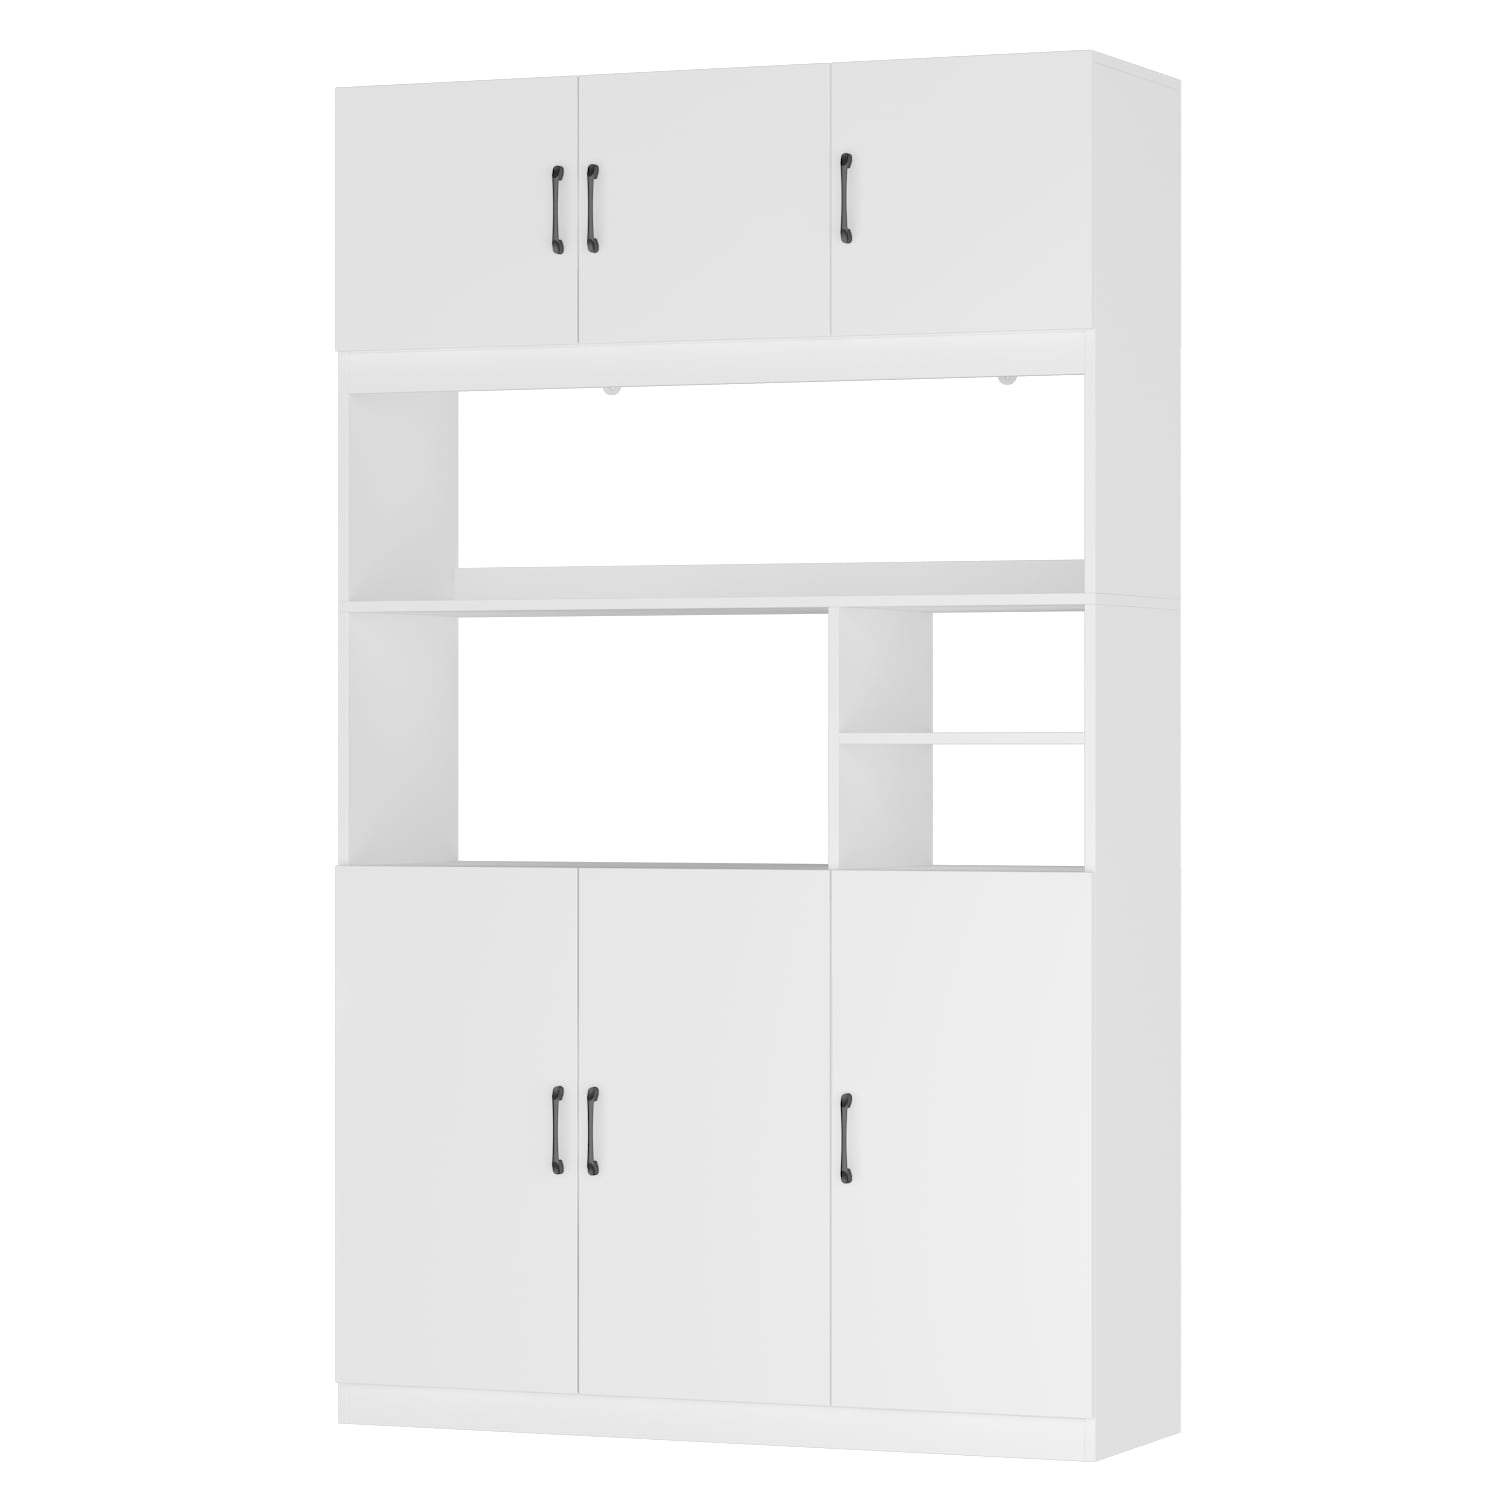 FUFU&GAGA 6-door Kitchen Pantry Cabinet Storage Hutch with Microwave Stand  in the Dining & Kitchen Storage department at